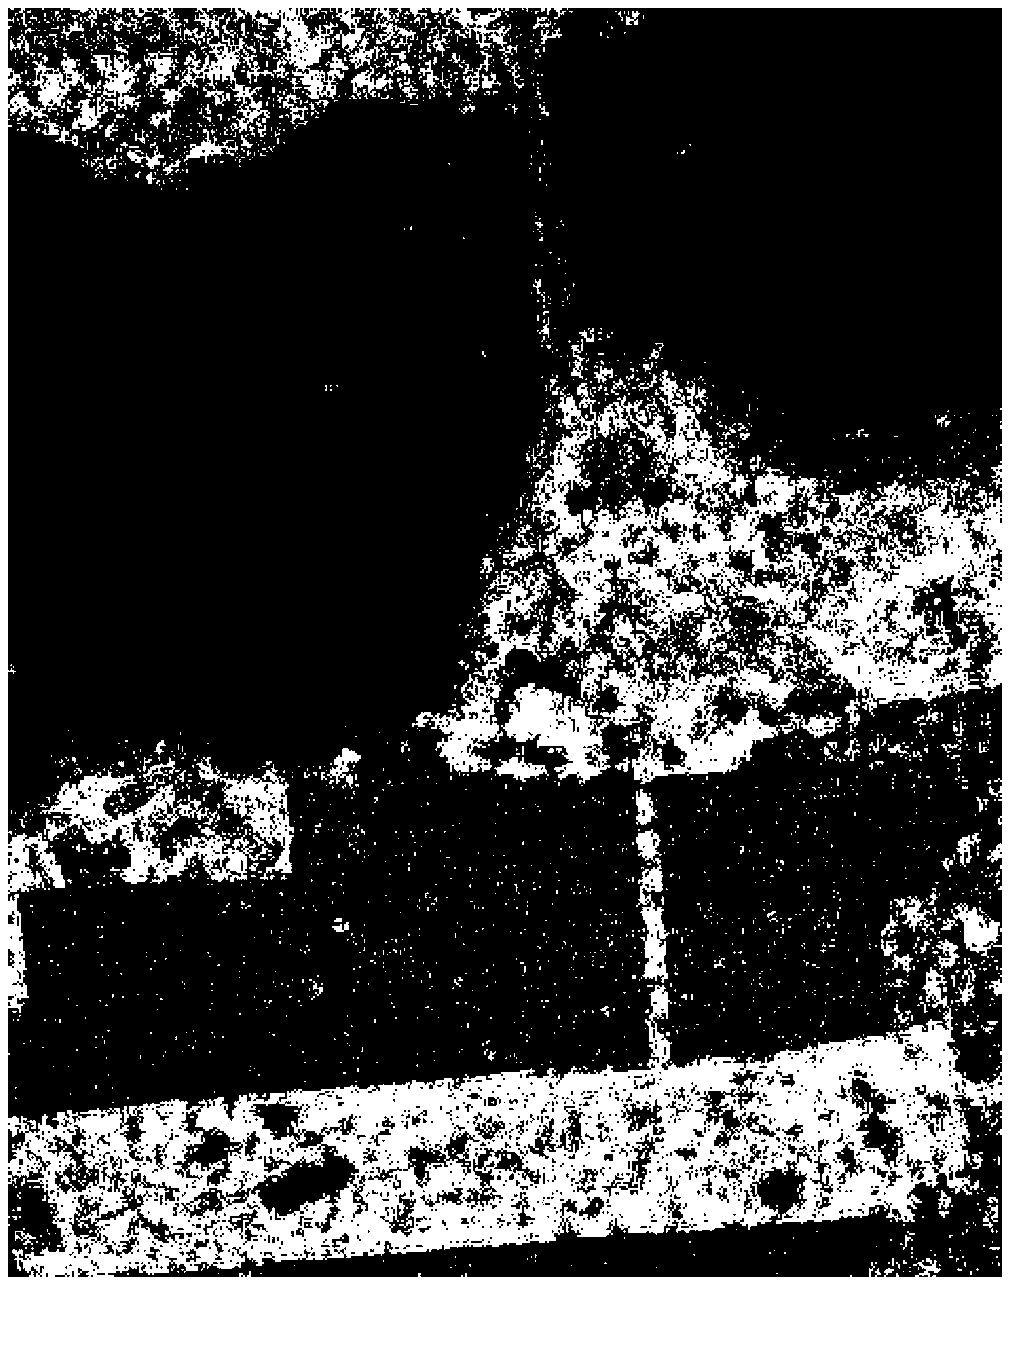 Polarized SAT (synthetic aperture radar) image classification method based on improved affinity propagation clustering